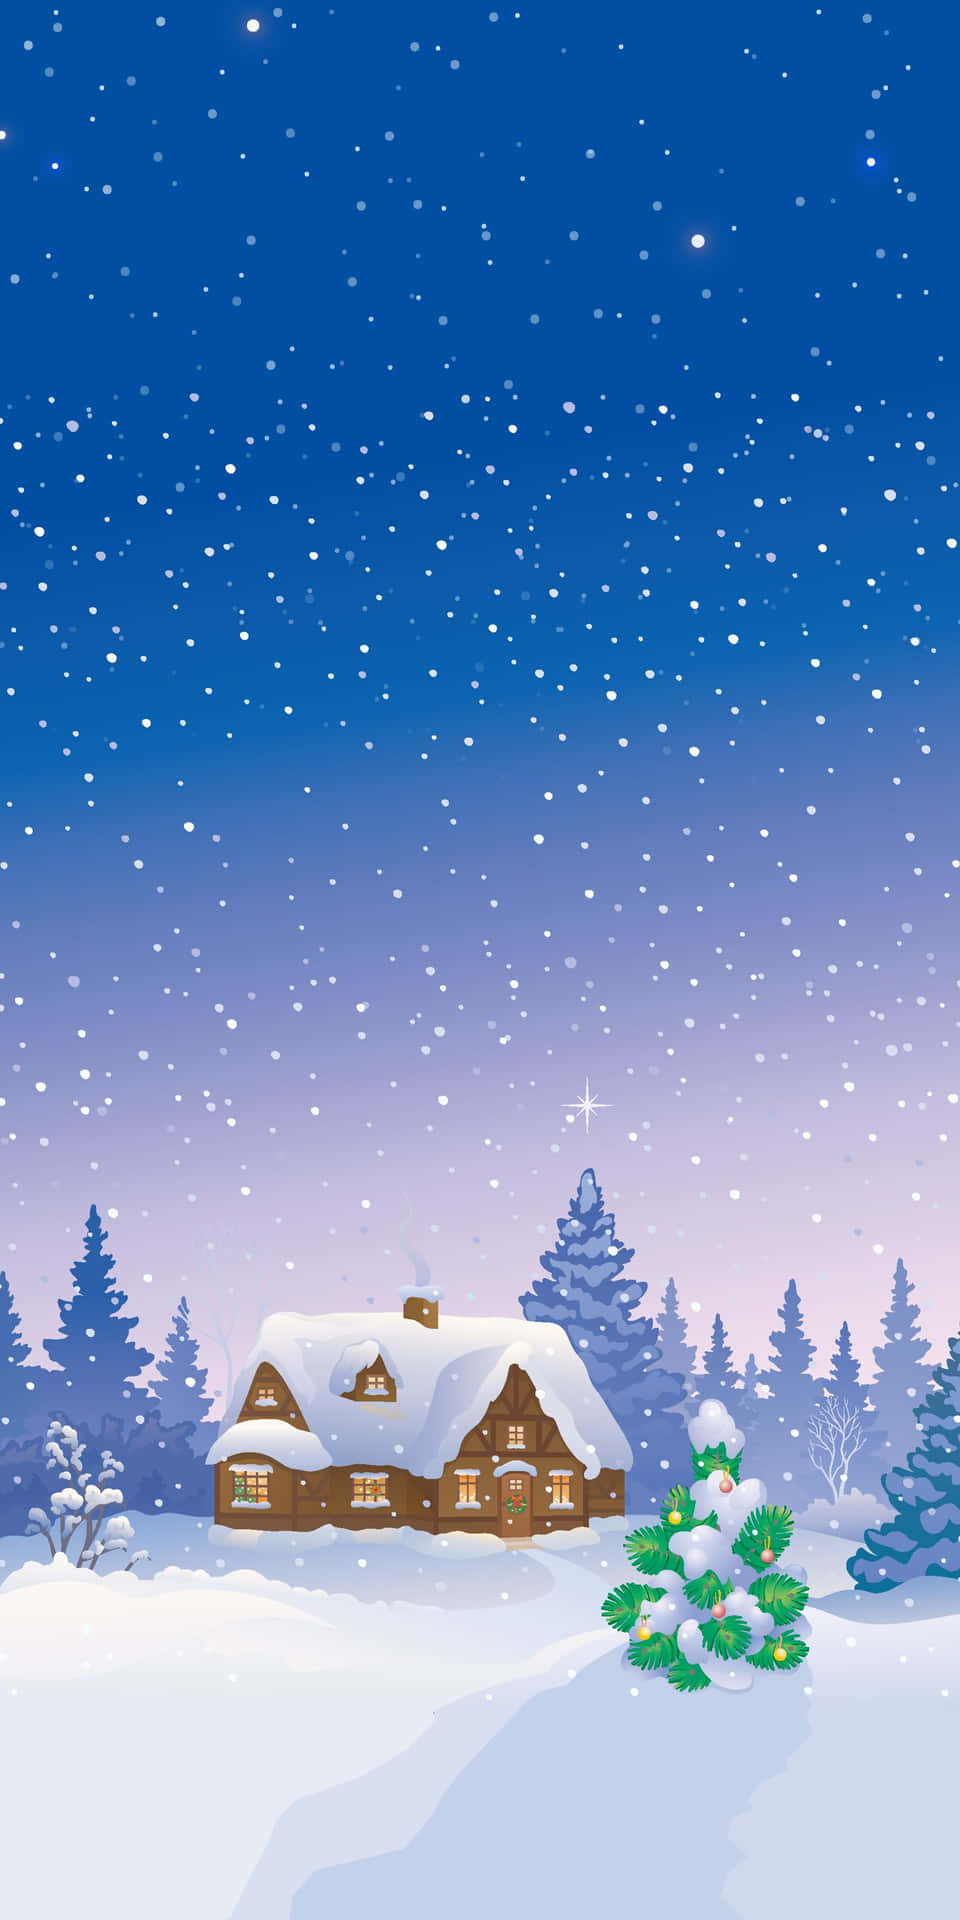 An enchanting iPhone wallpaper capturing the beauty of Christmas comingled with a magical snowfall. Wallpaper